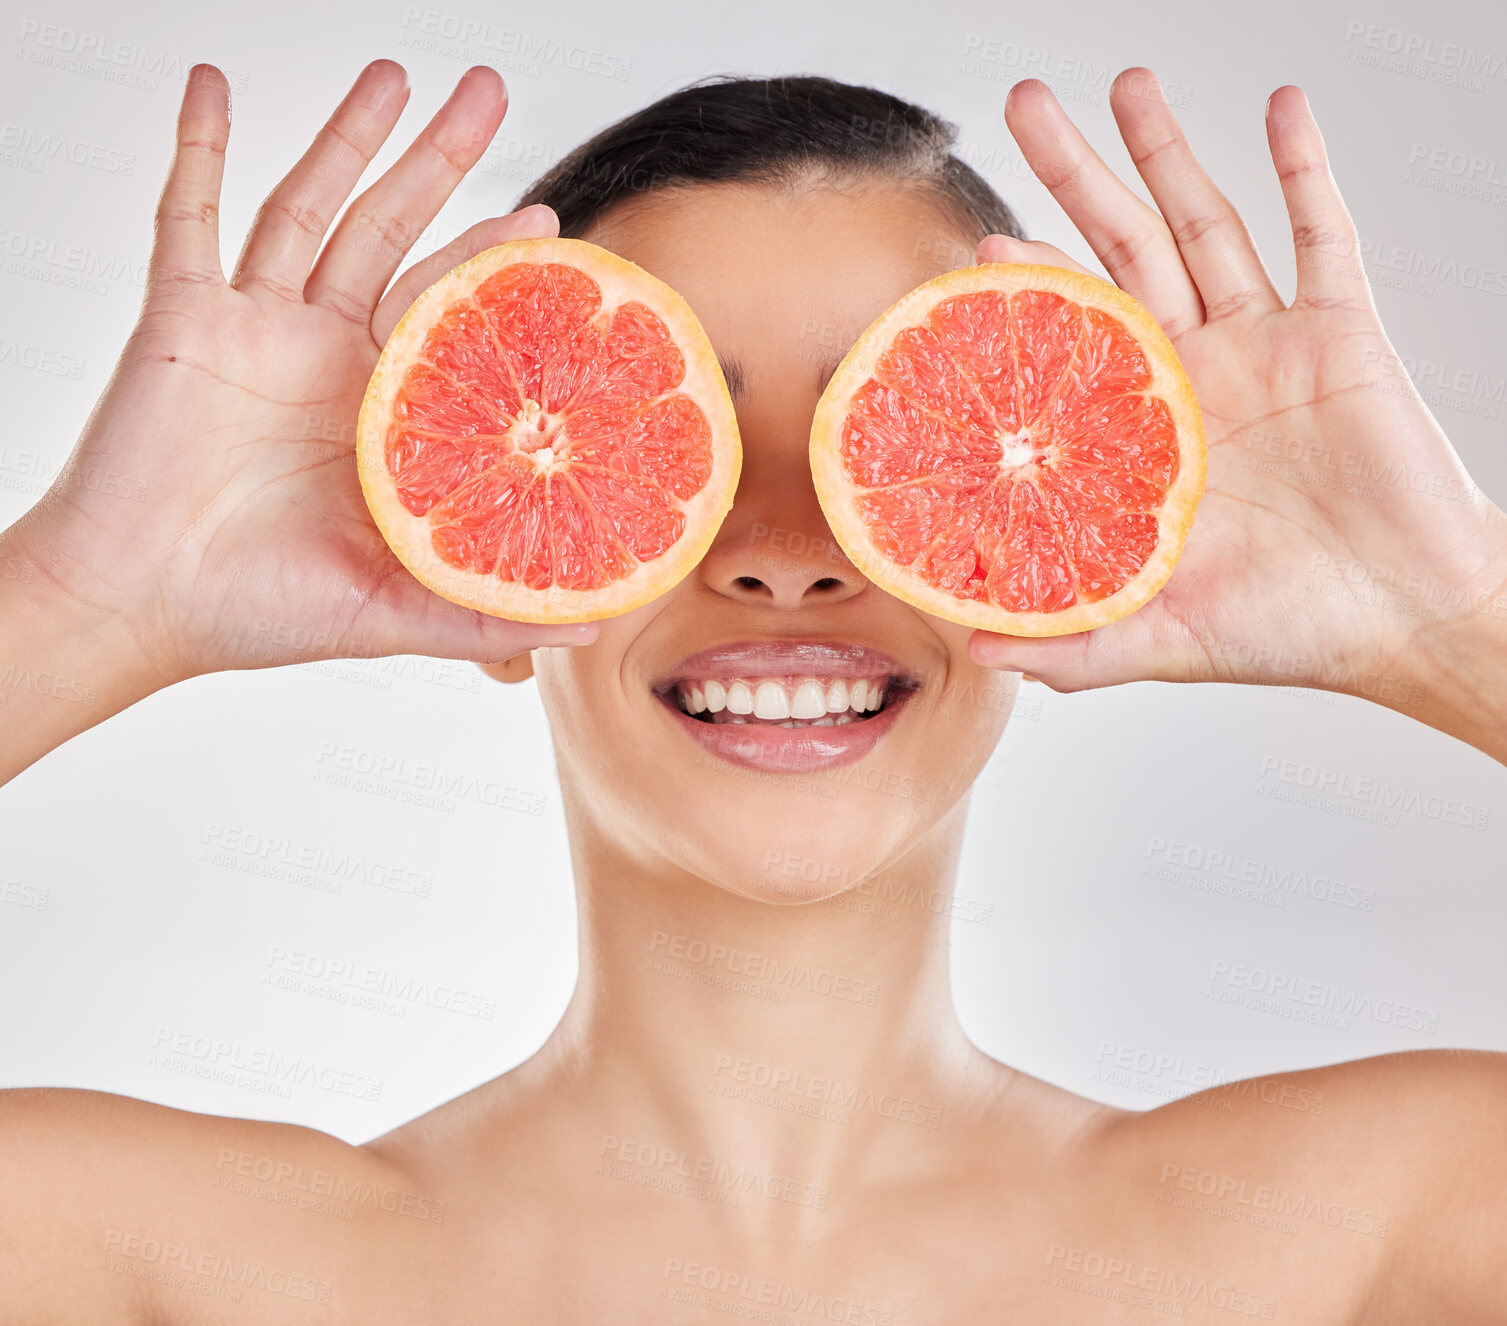 Buy stock photo Studio portrait of a young woman posing with half a grapefruit against a grey background